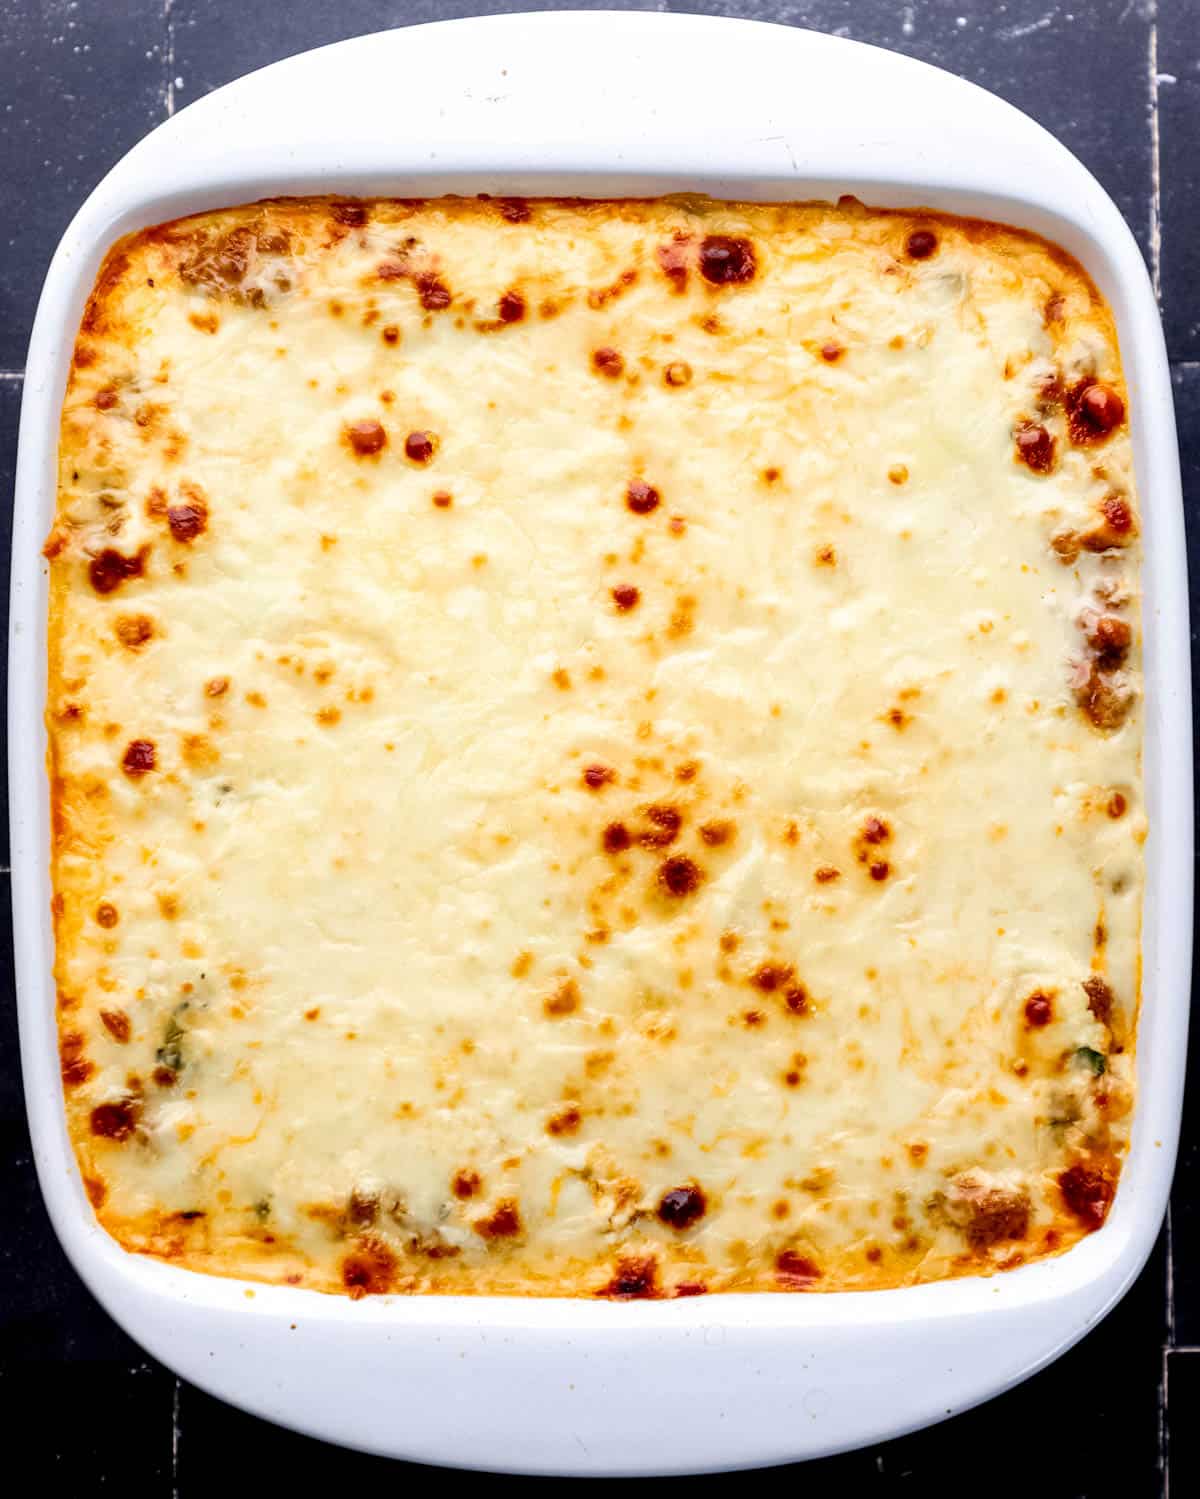 Overhead view of baked lasagna in square white baking dish on black tile surface. 